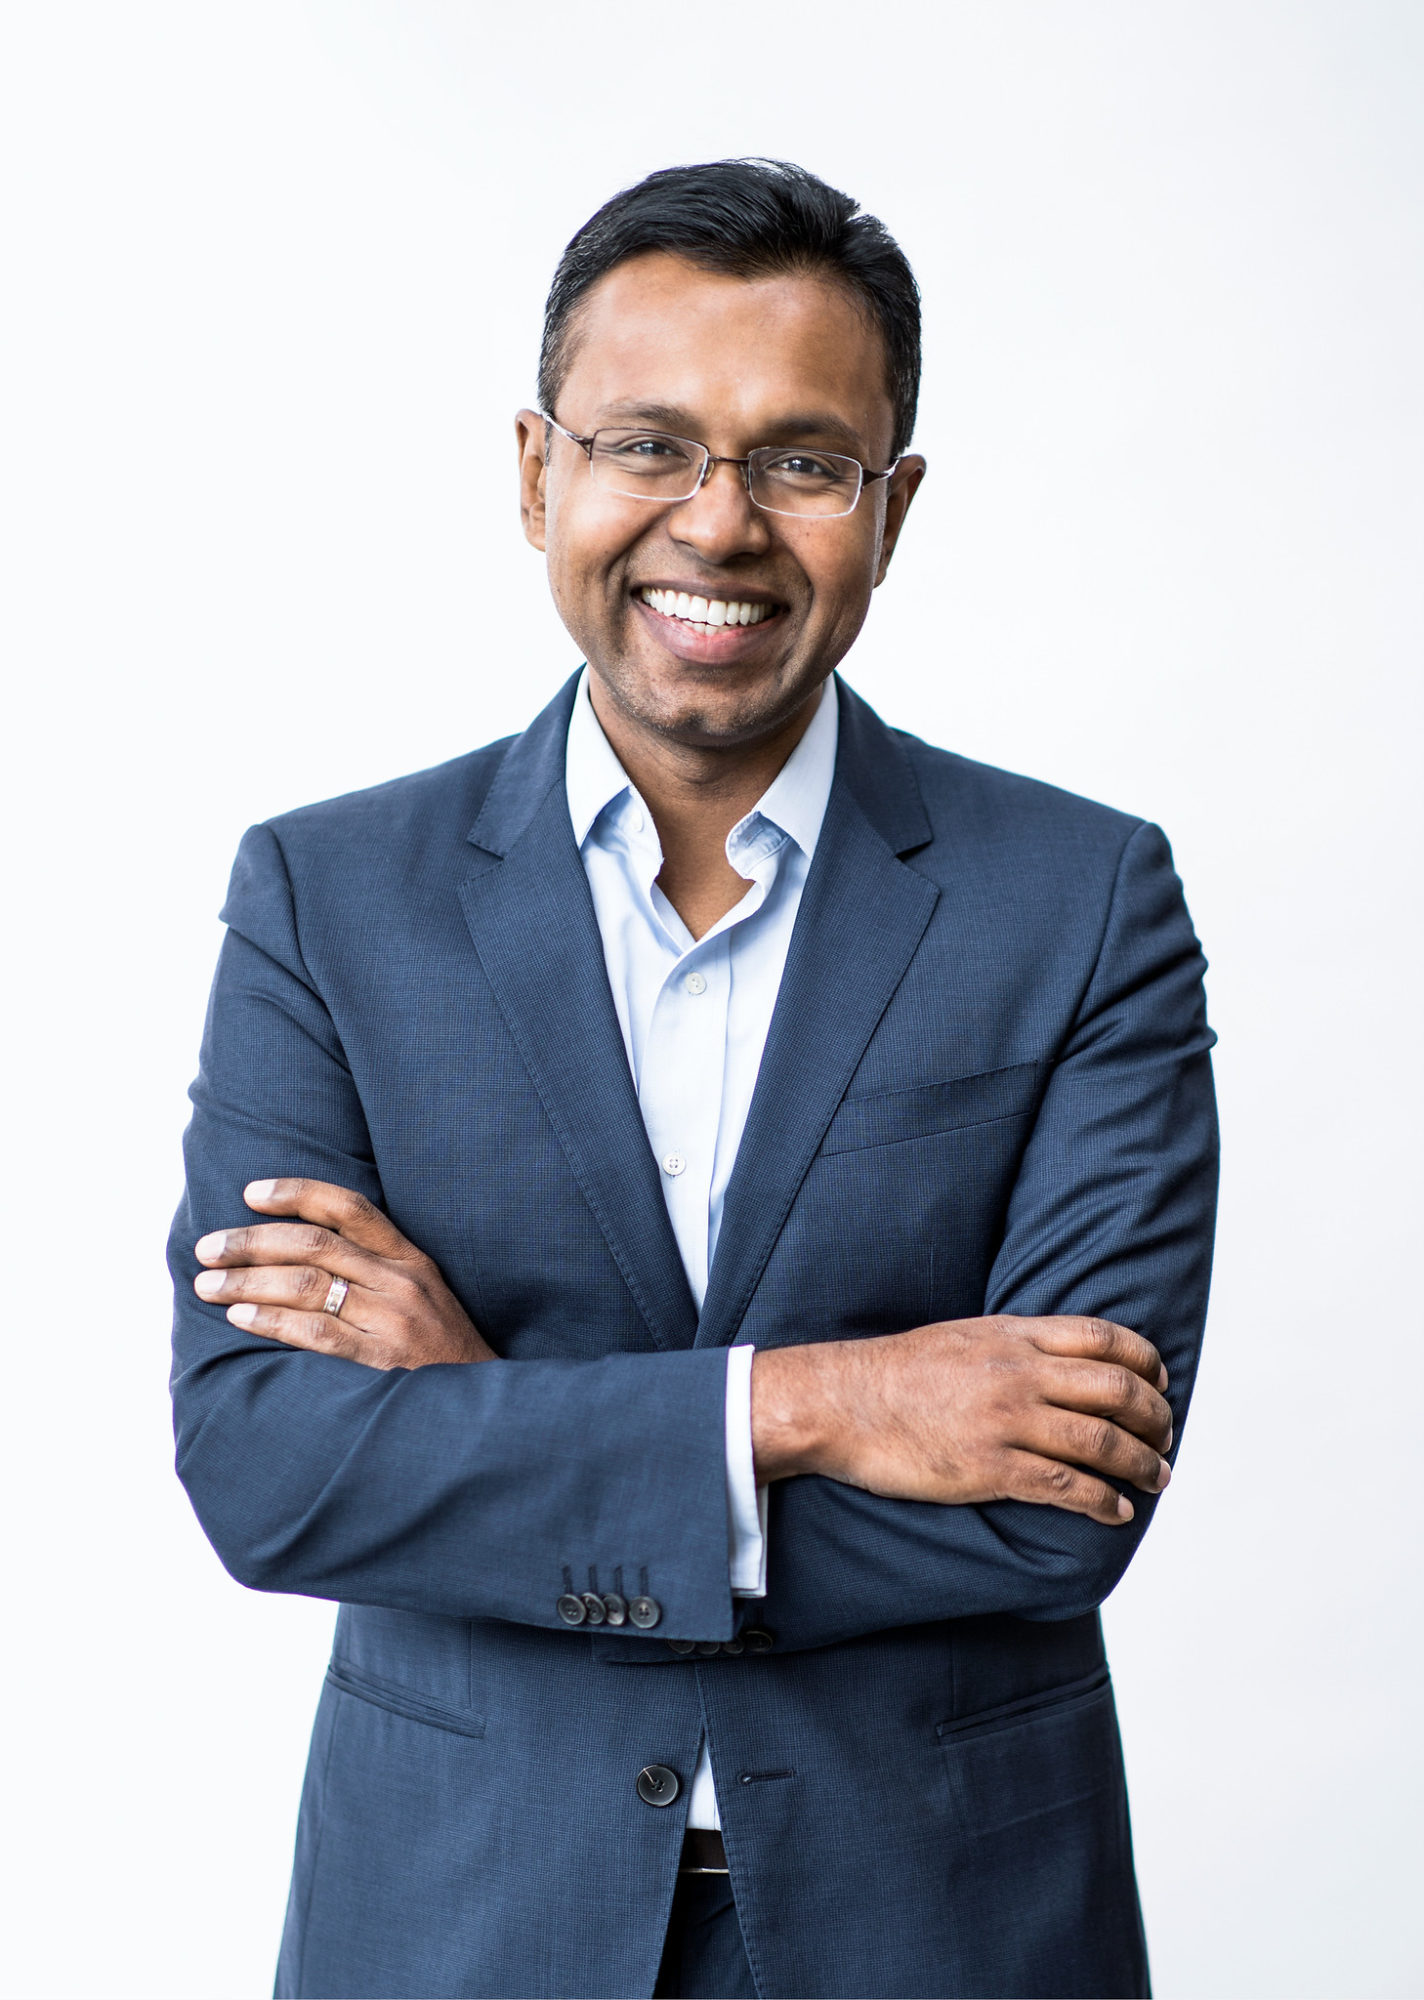 Dr. Dinesh Thavendiranathan smiling with a plain background. He is wearing a suit and his arms are crossed in front of him.